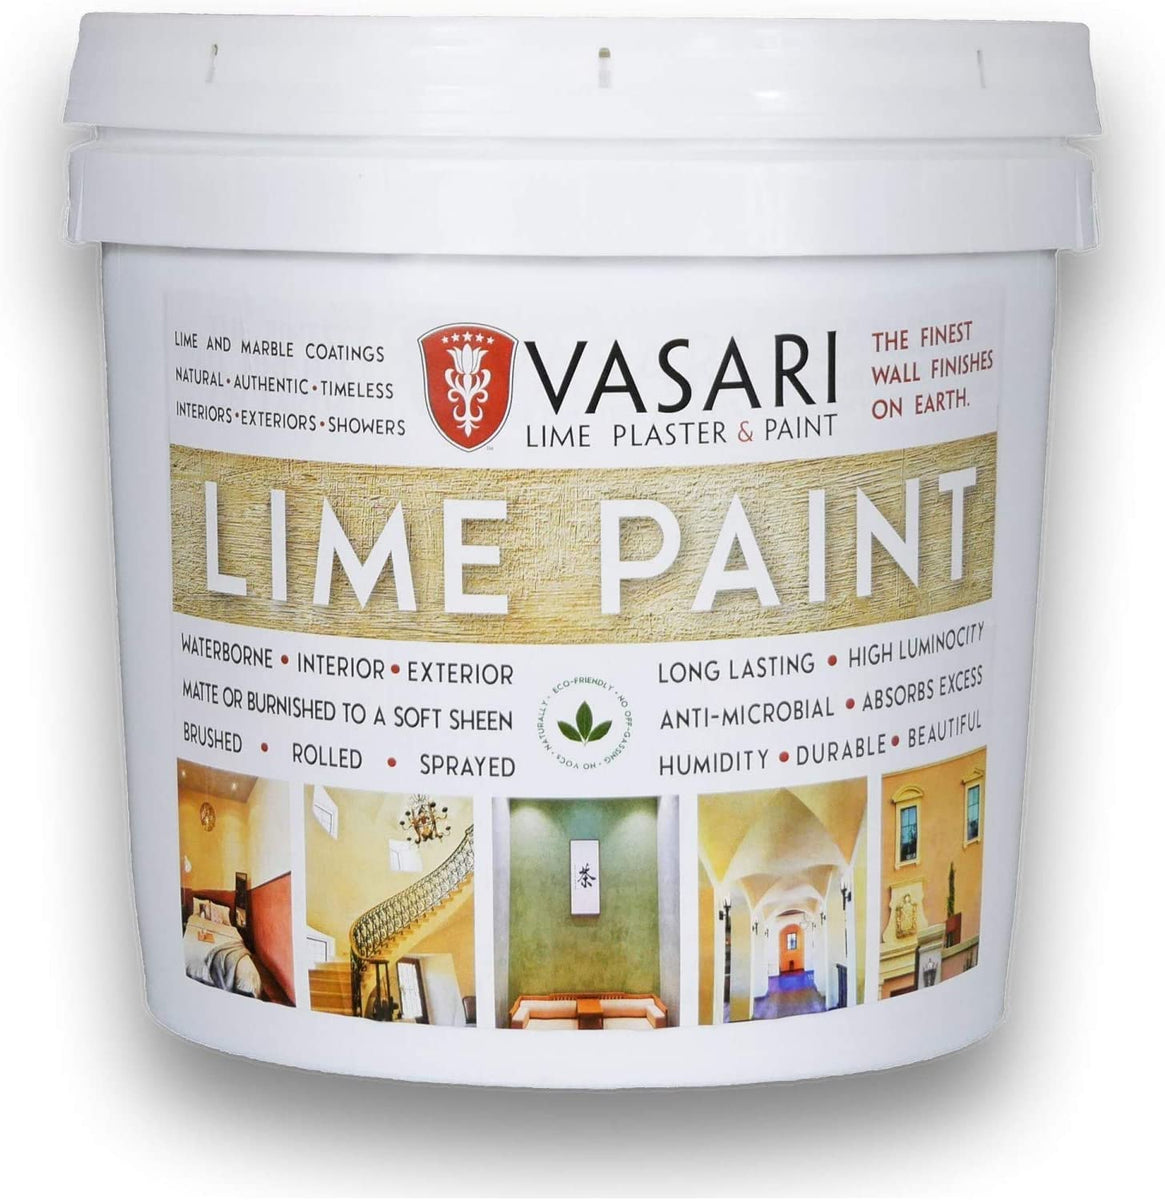 VASARI Lime Plaster and Paint, Veneziano Plaster (Smooth Finish), Made  from Natural Lime and Powdered Marble, color: Natural White #1